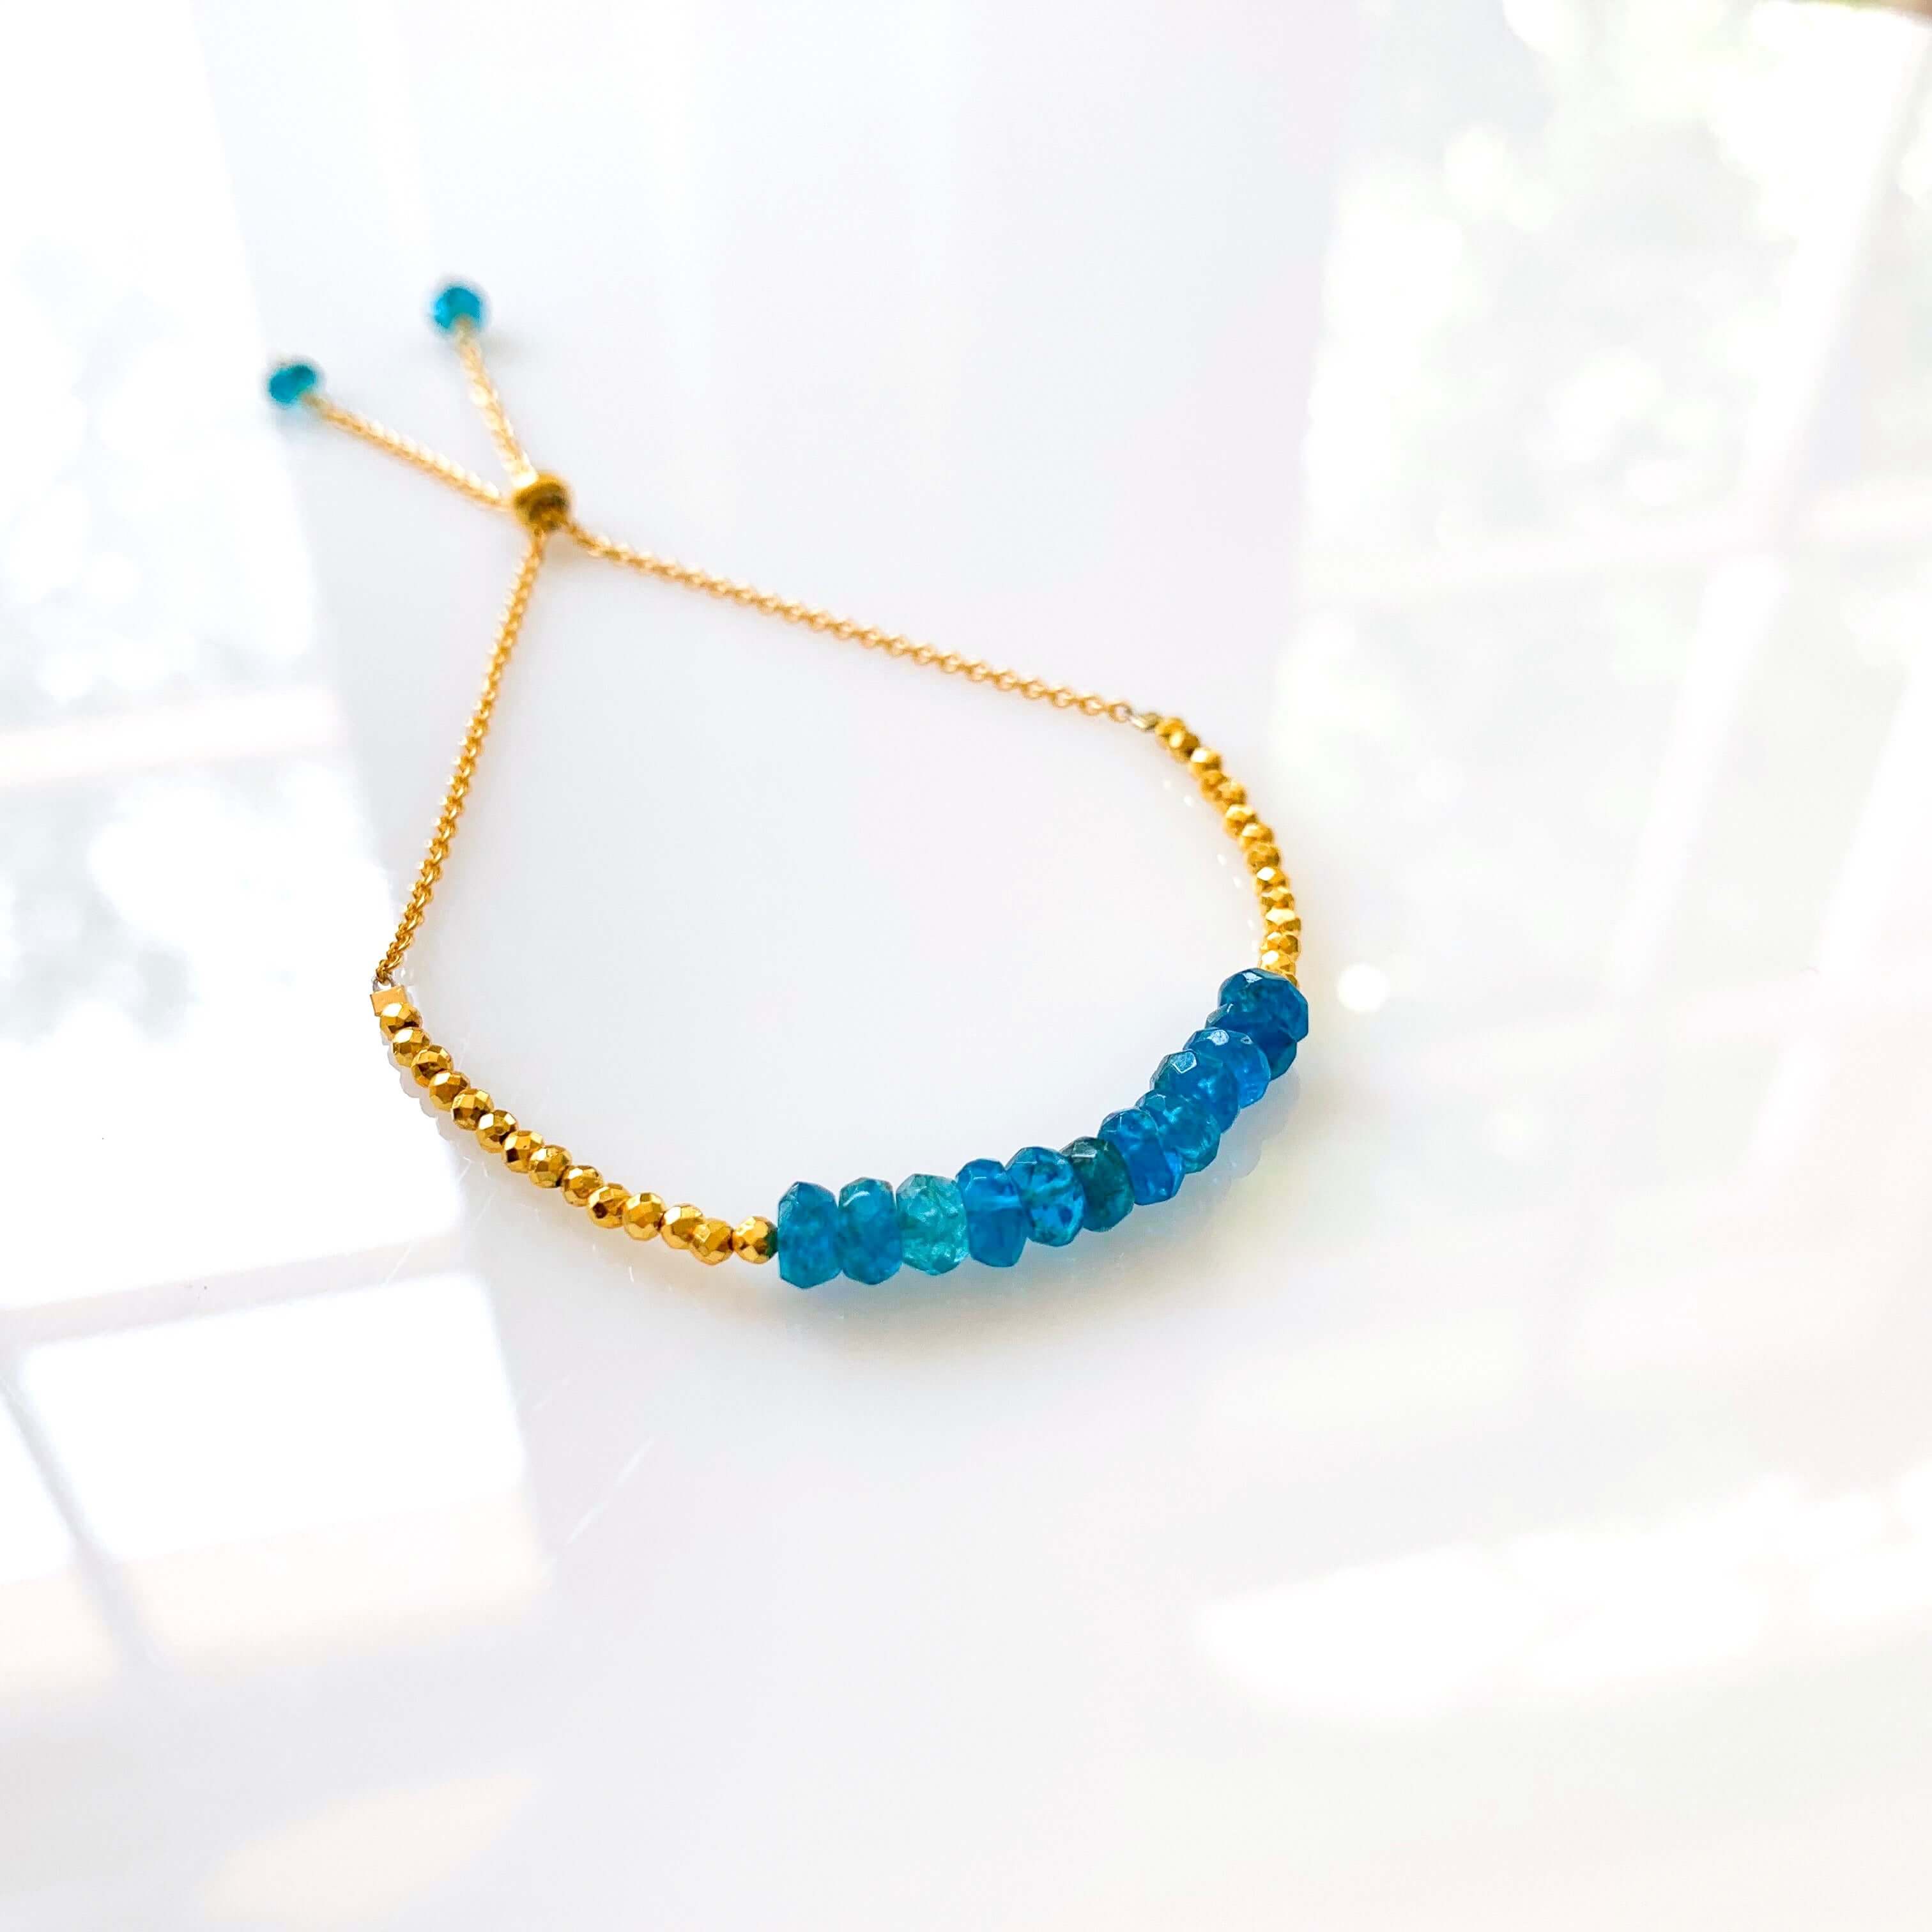  Neon Apatite stone bracelet with  golden pyrite accent beads, adjustable slider clasp, 14k gold plated over Italian silver chain